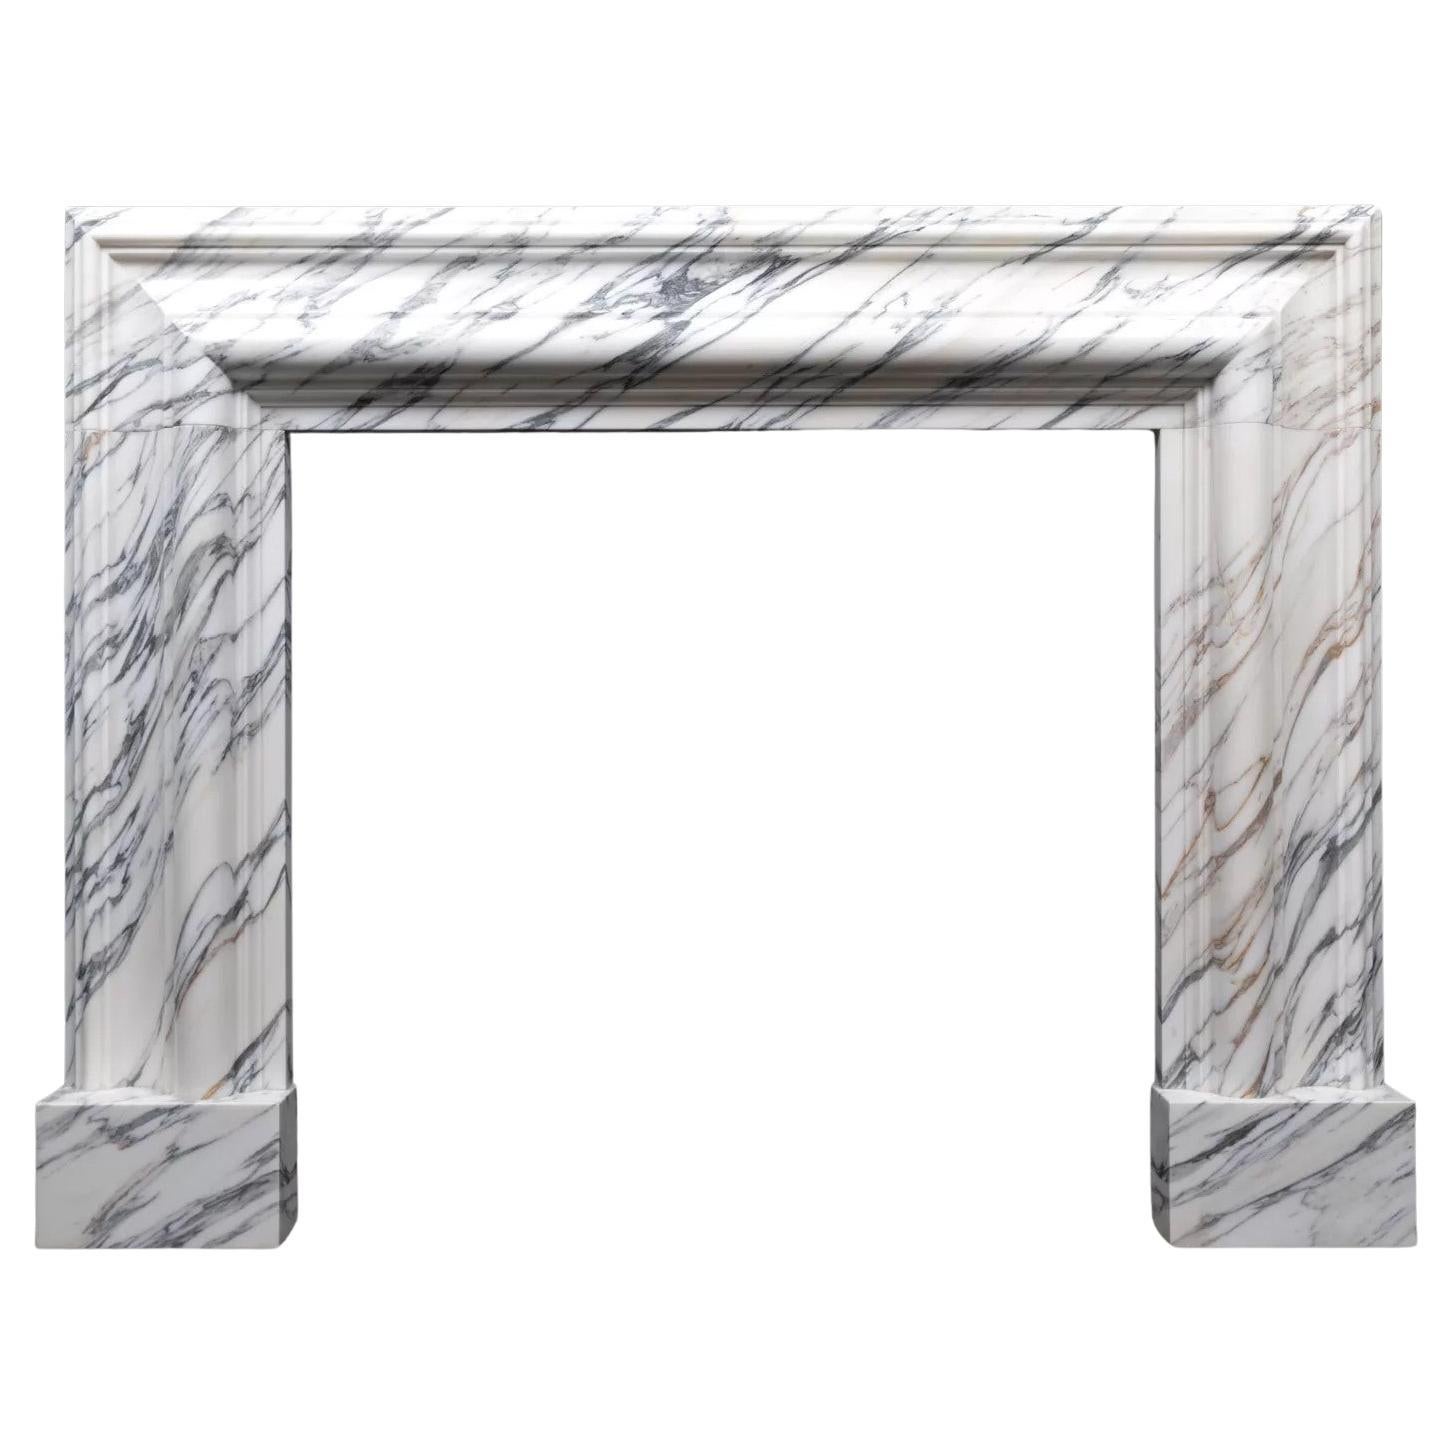 A large Arabescato marble bolection mantel by Ryan & Smith